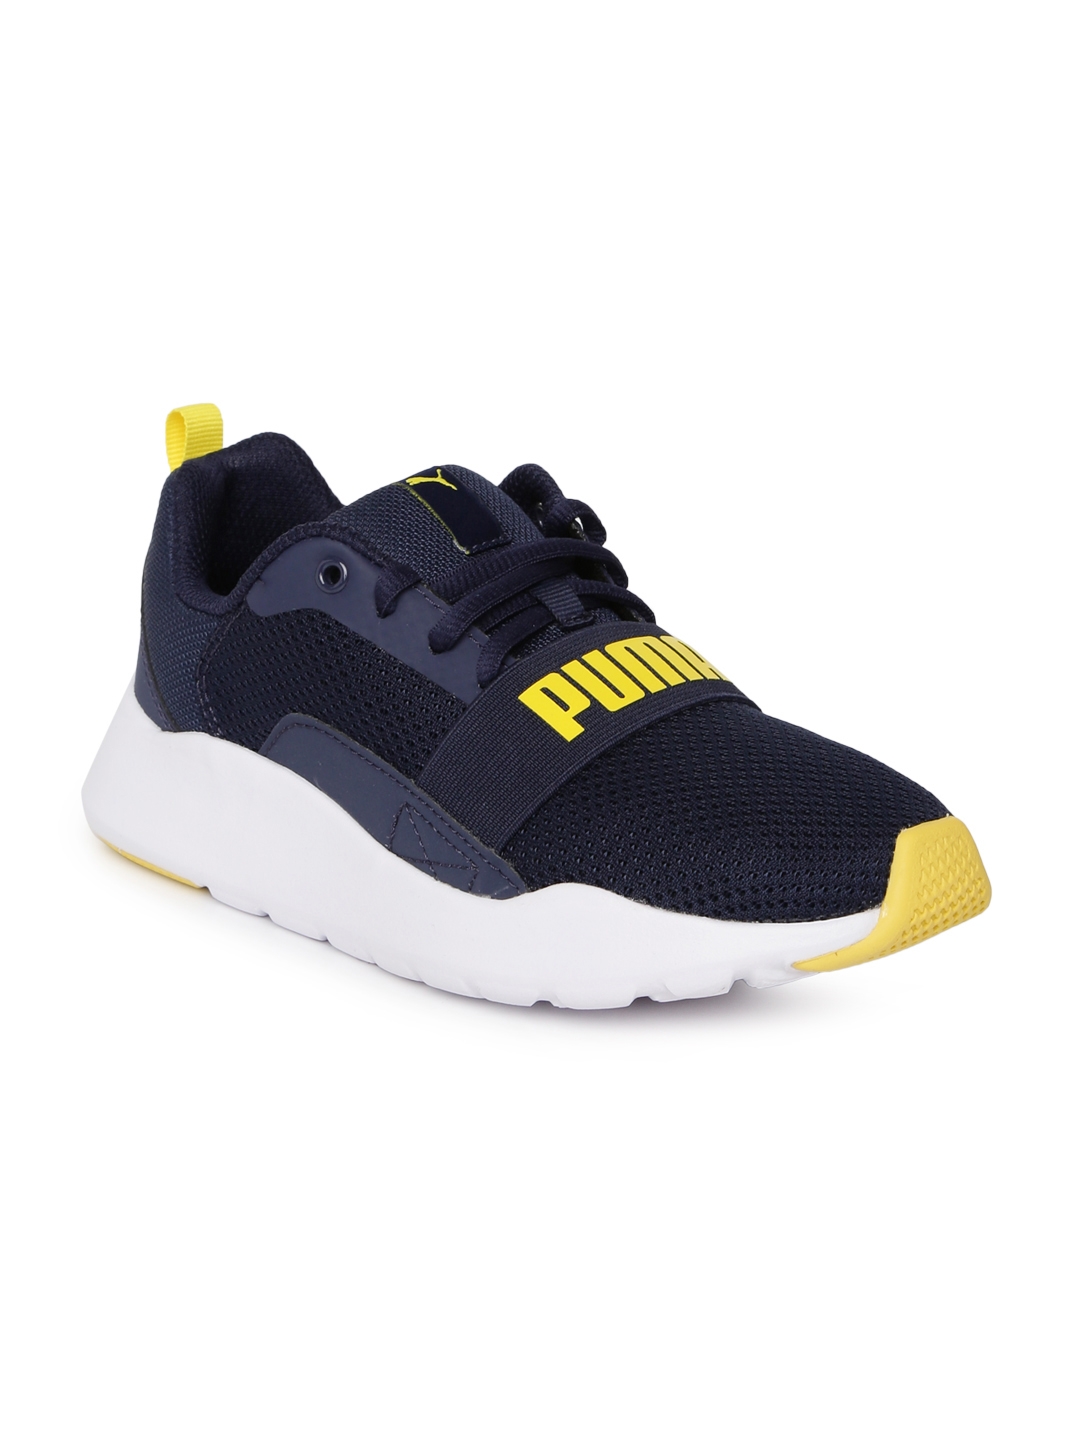 Buy Puma Kids Navy Blue Wired PS Running Shoes - Sports Shoes for ...